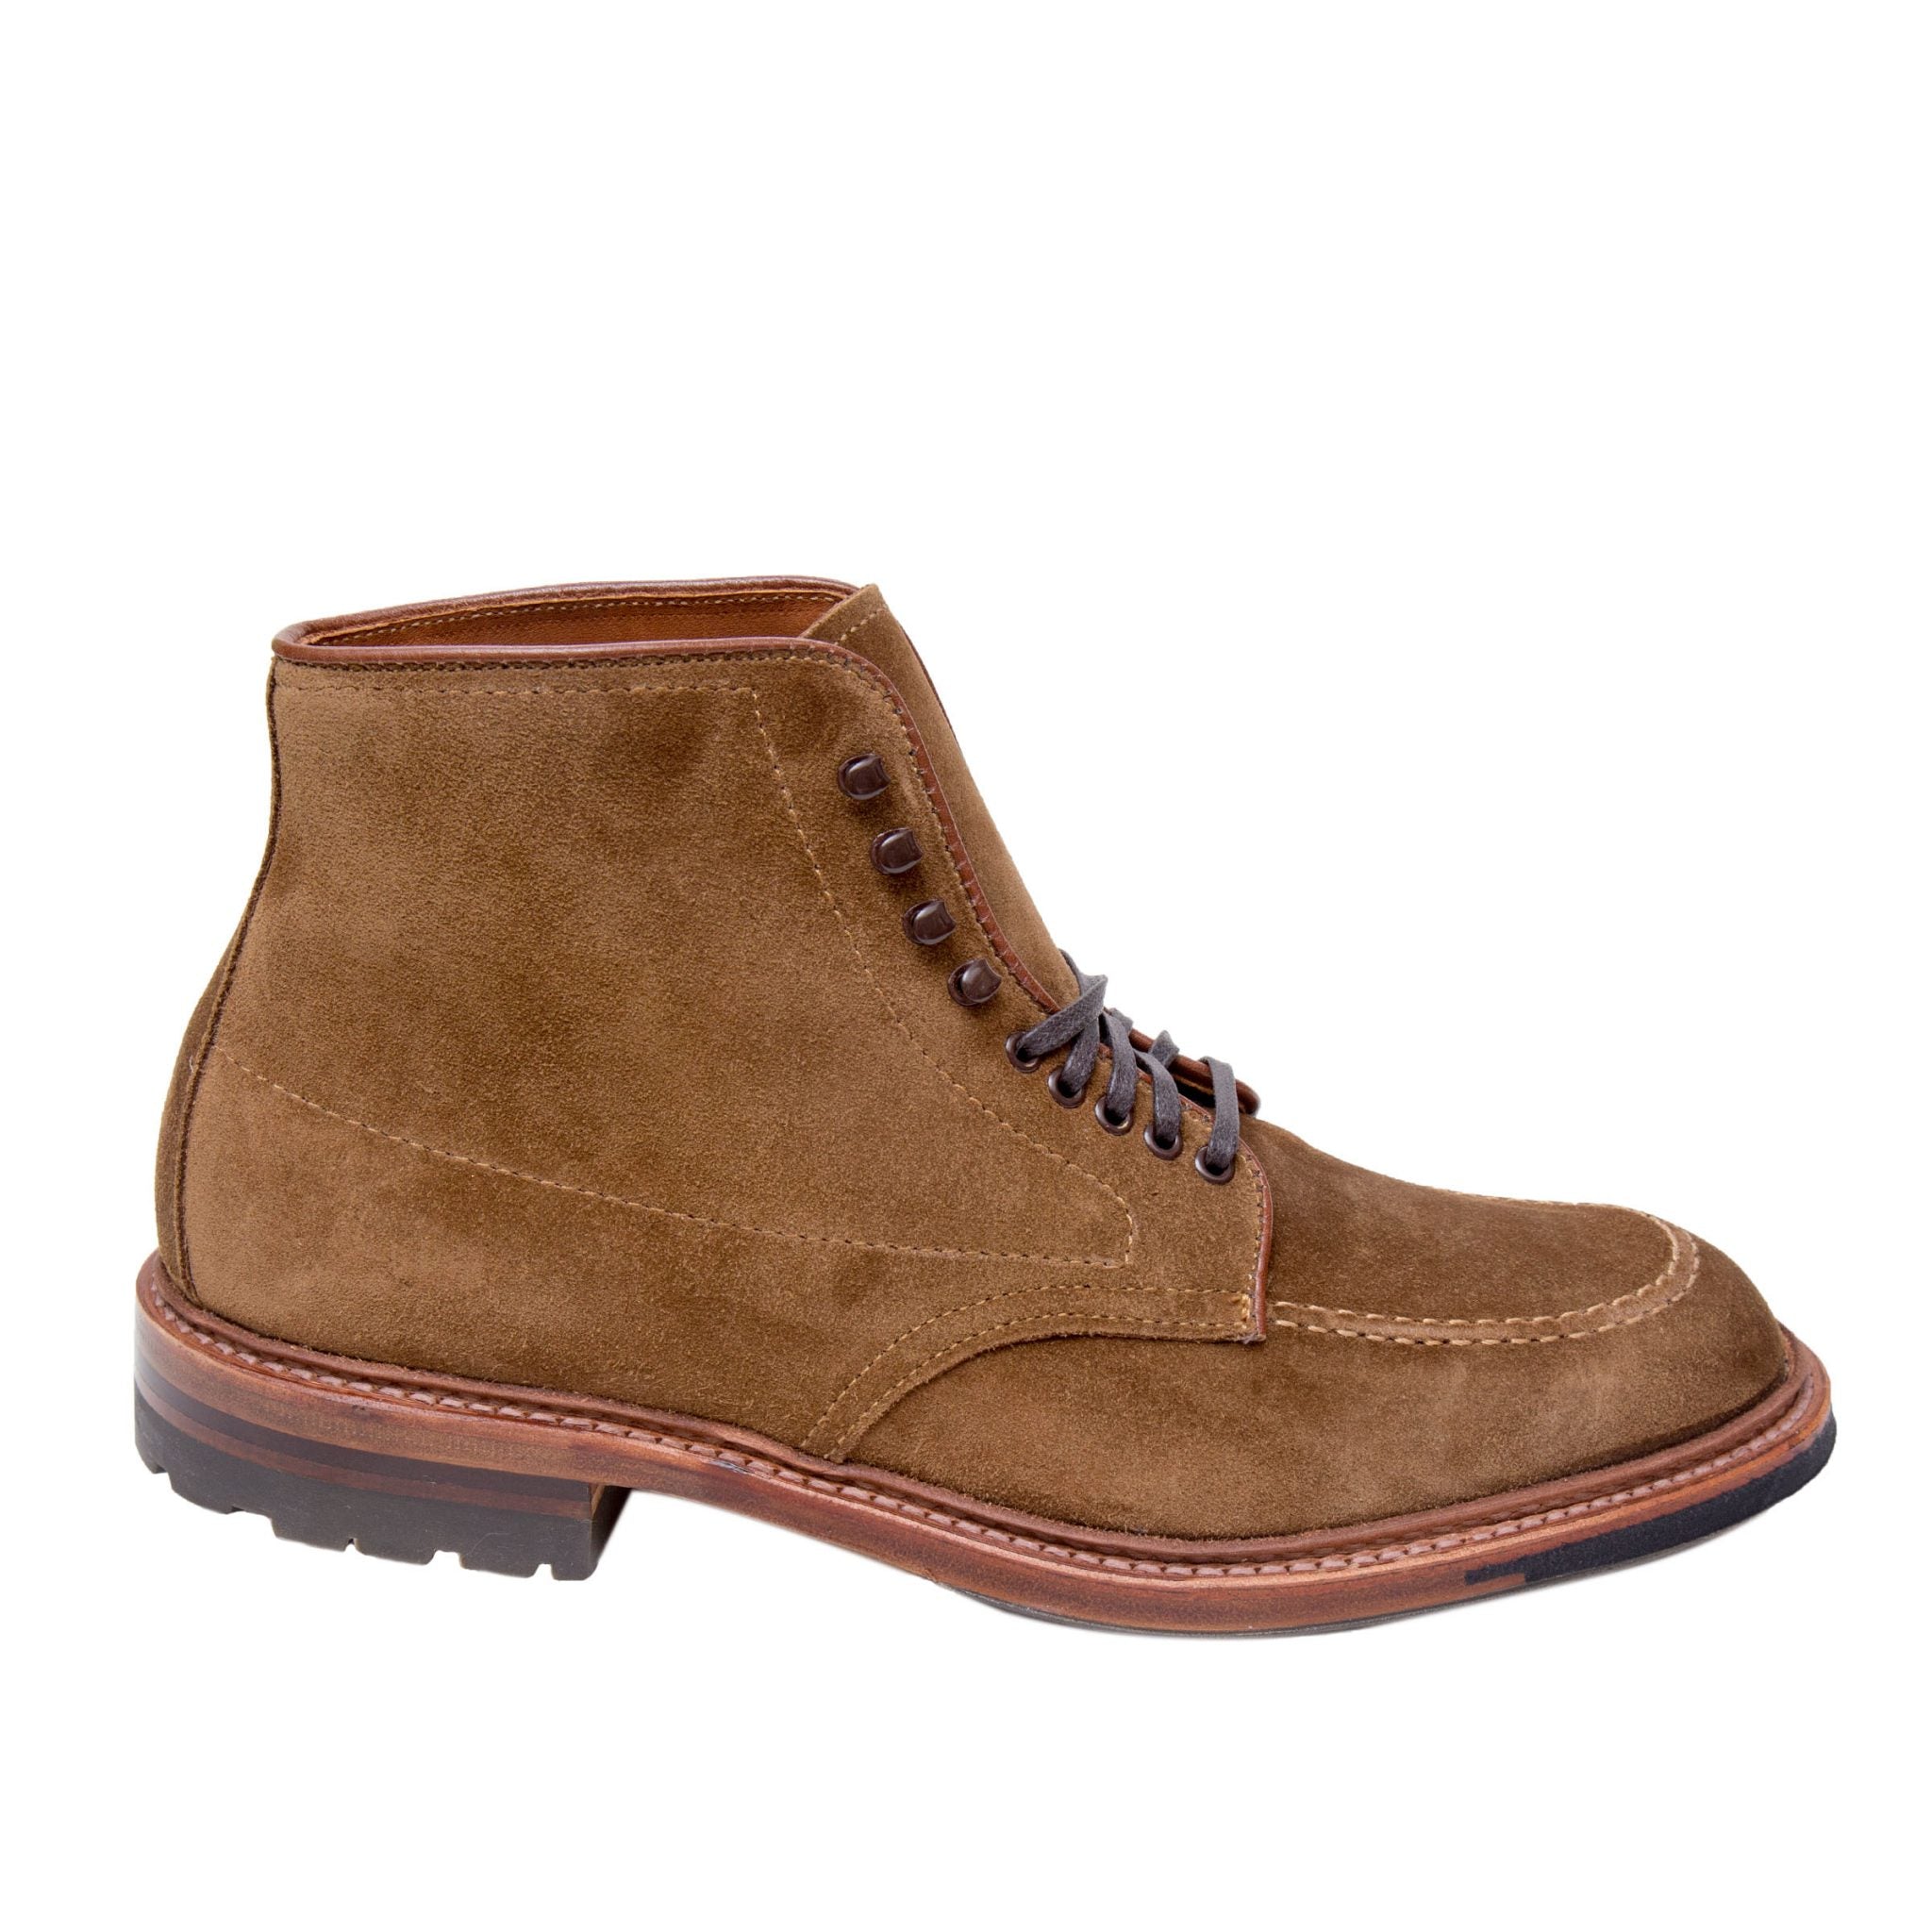 Indy Boot Commando Sole Snuff Suede #4011HC